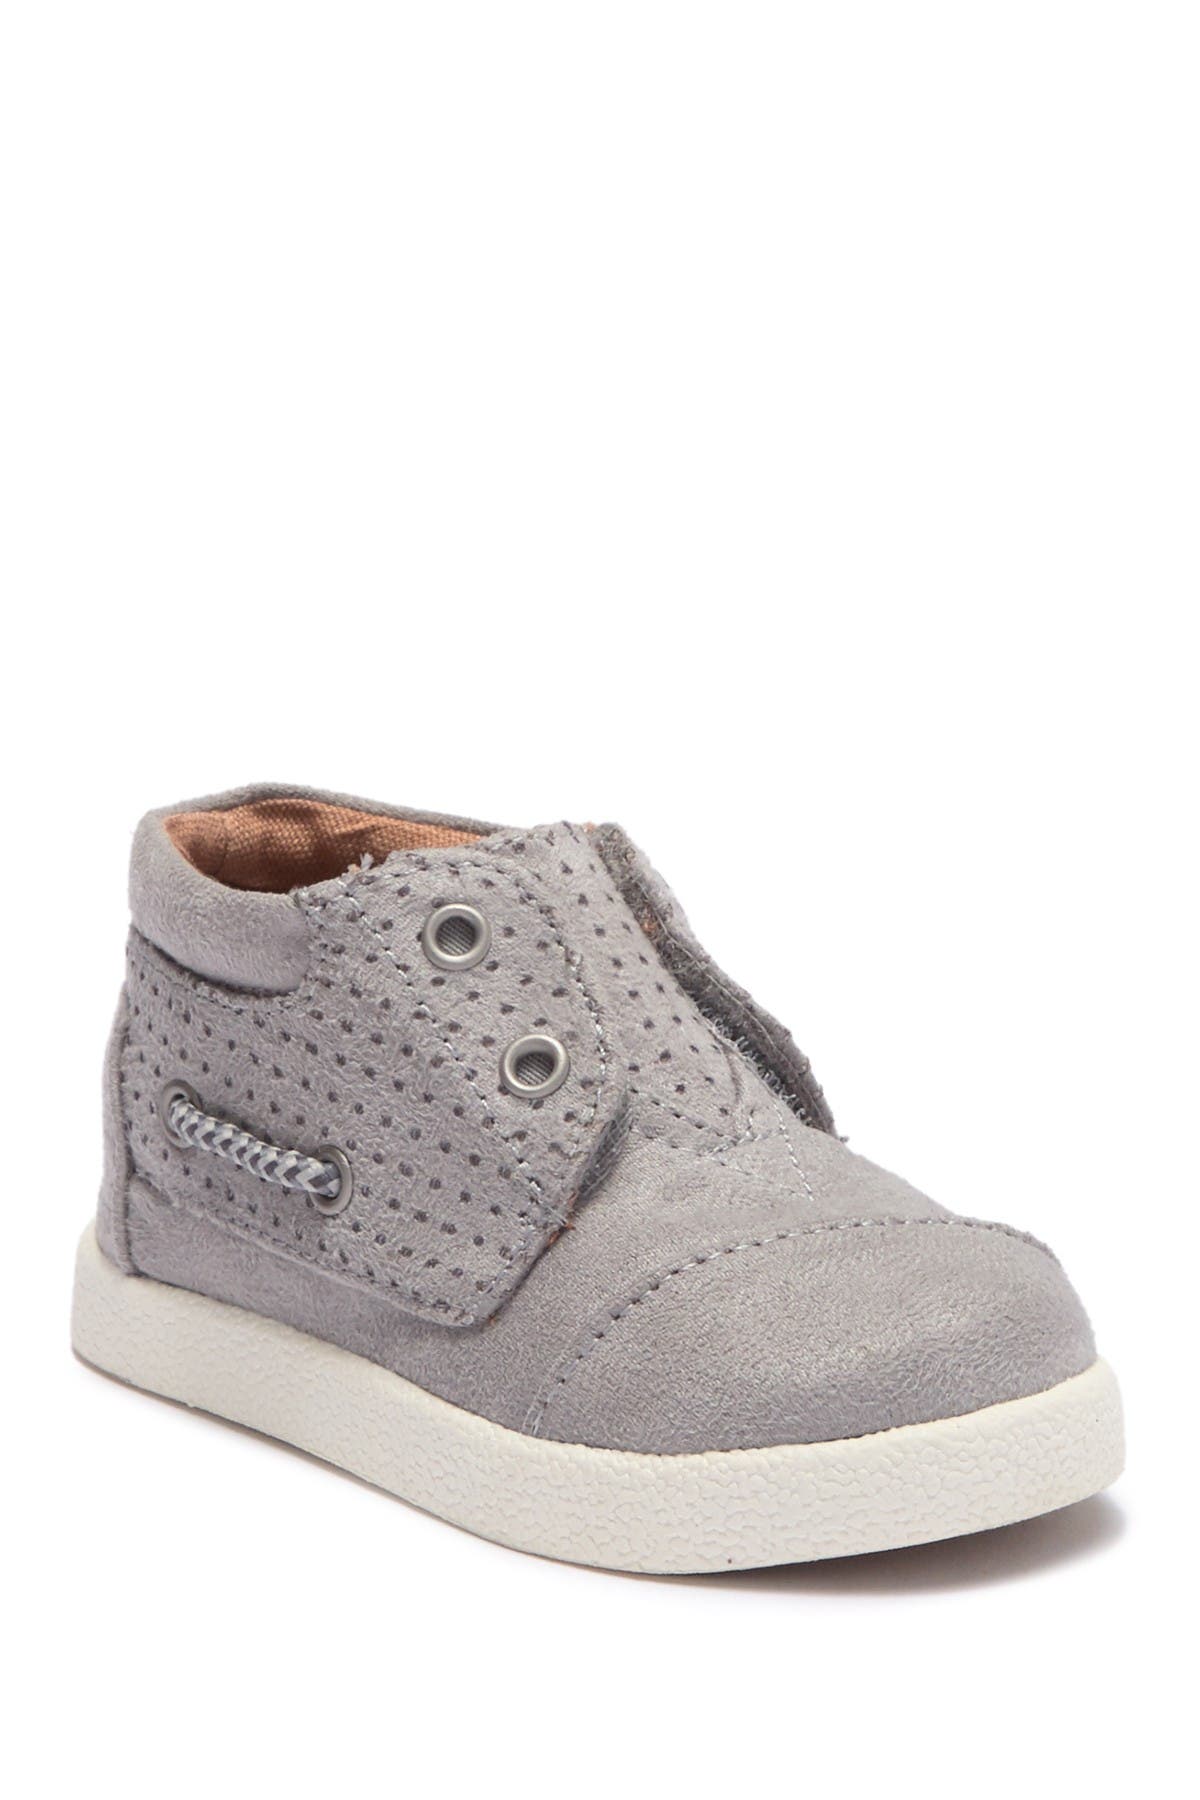 toms perforated